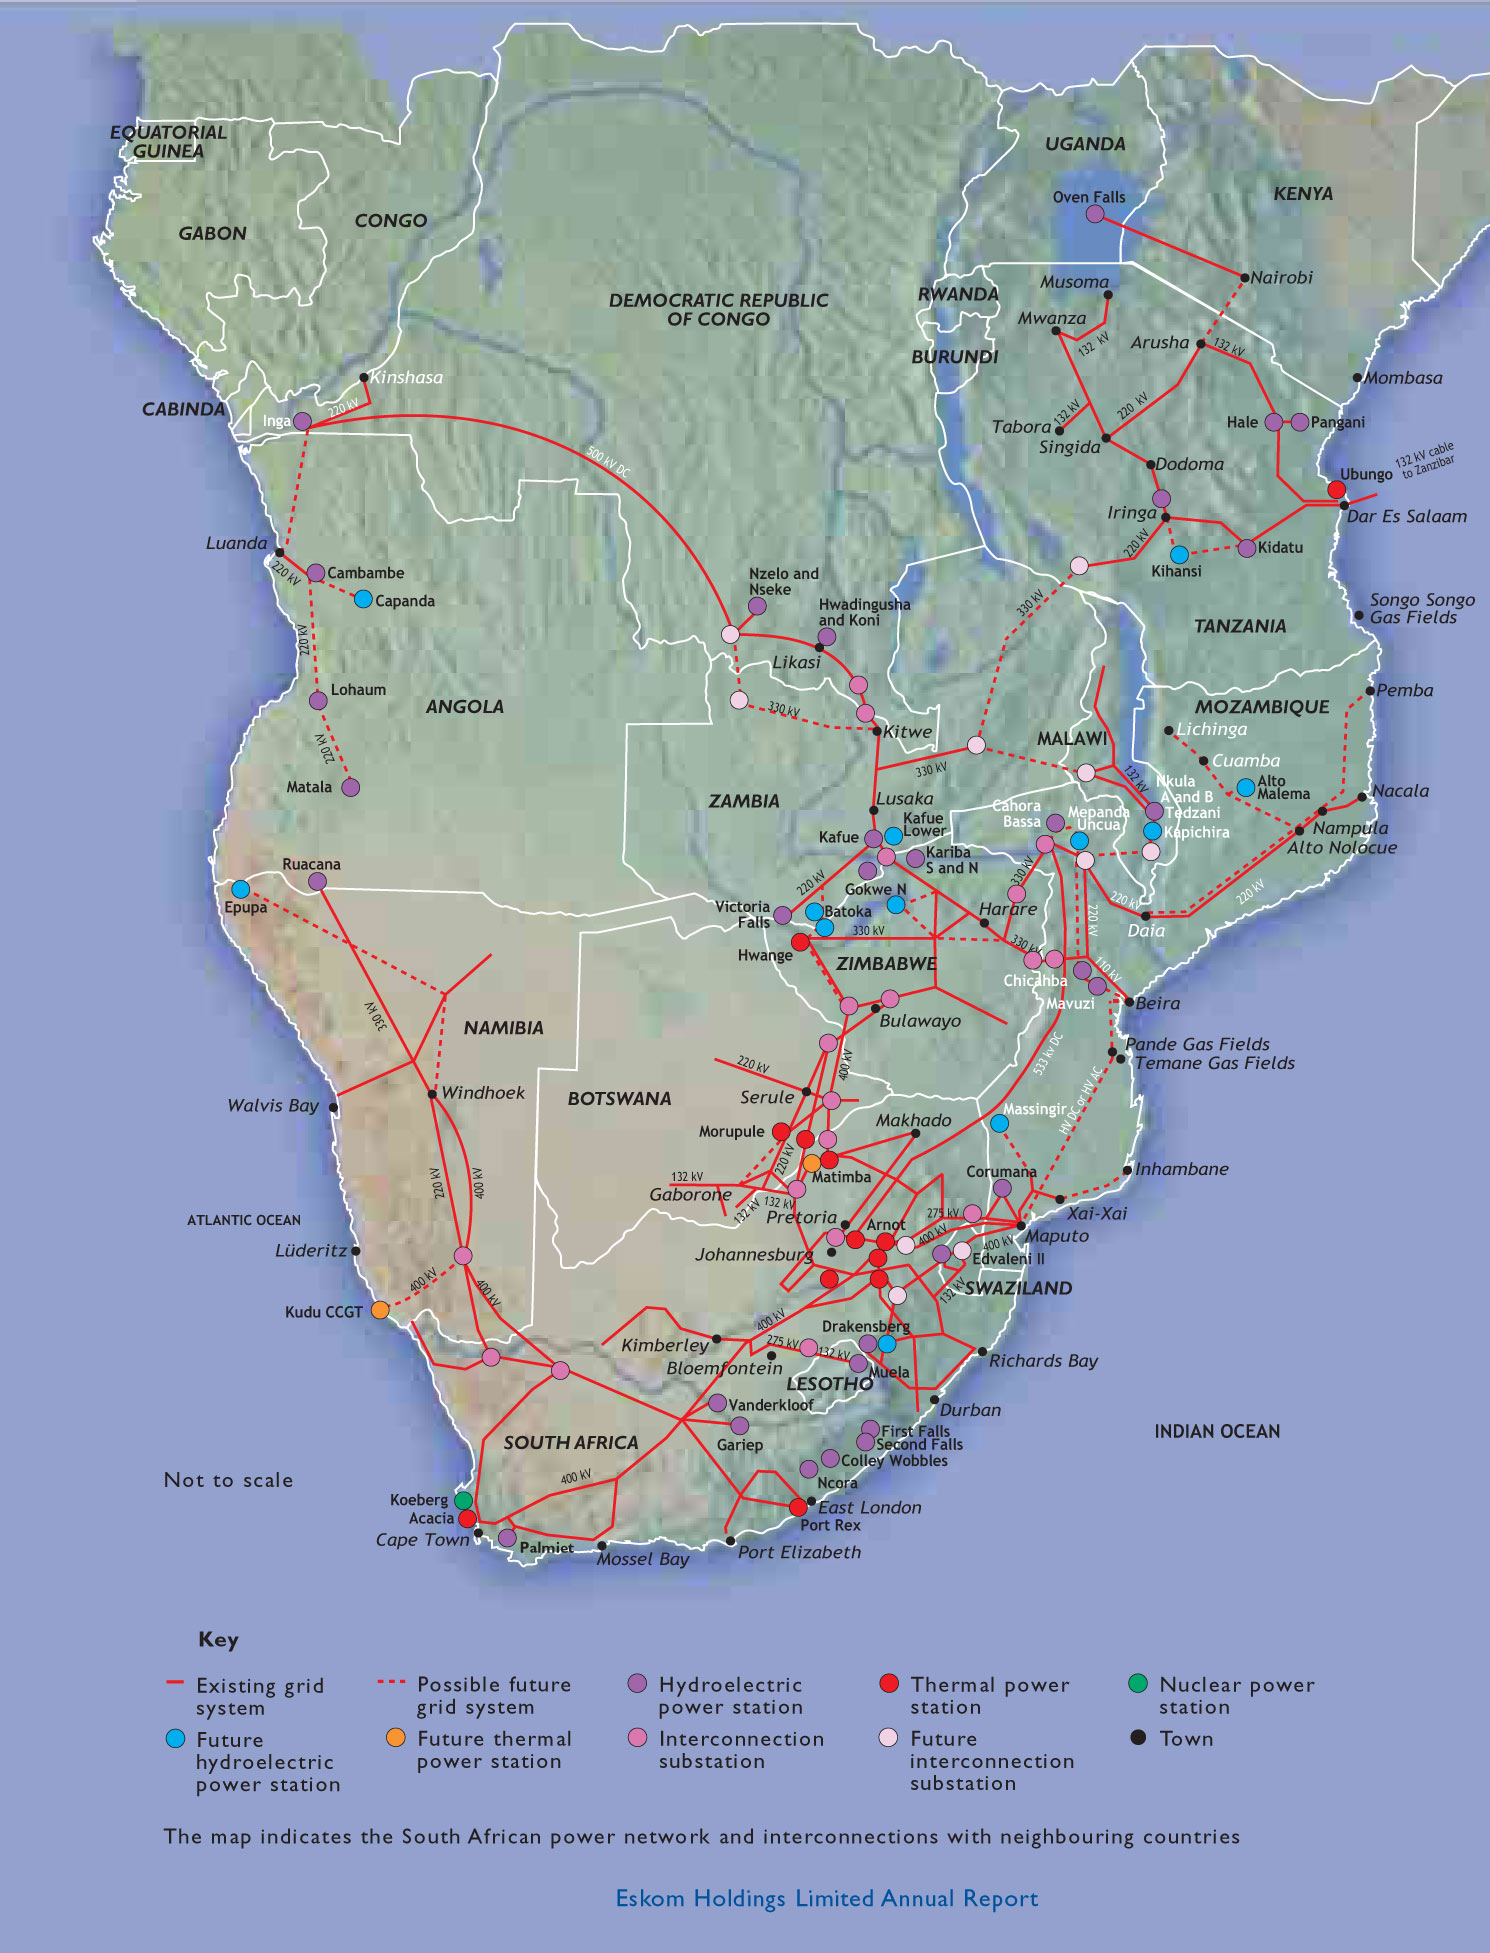 South Africa energy grid map